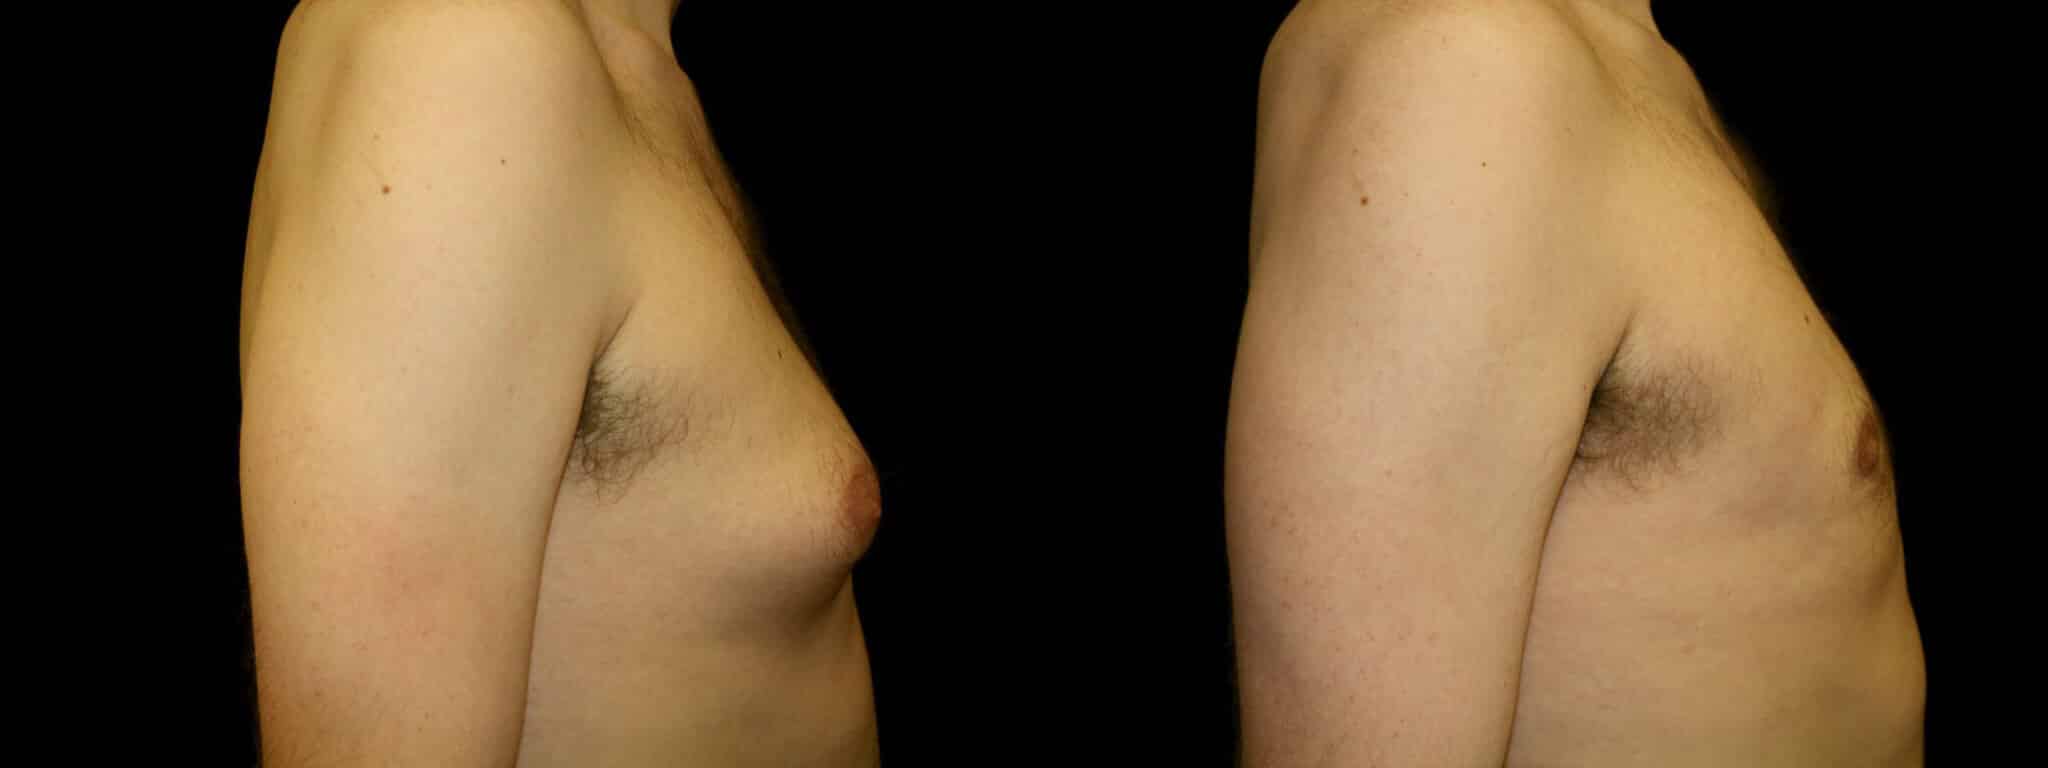 Gynecomastia Patient 11 Before & After Details